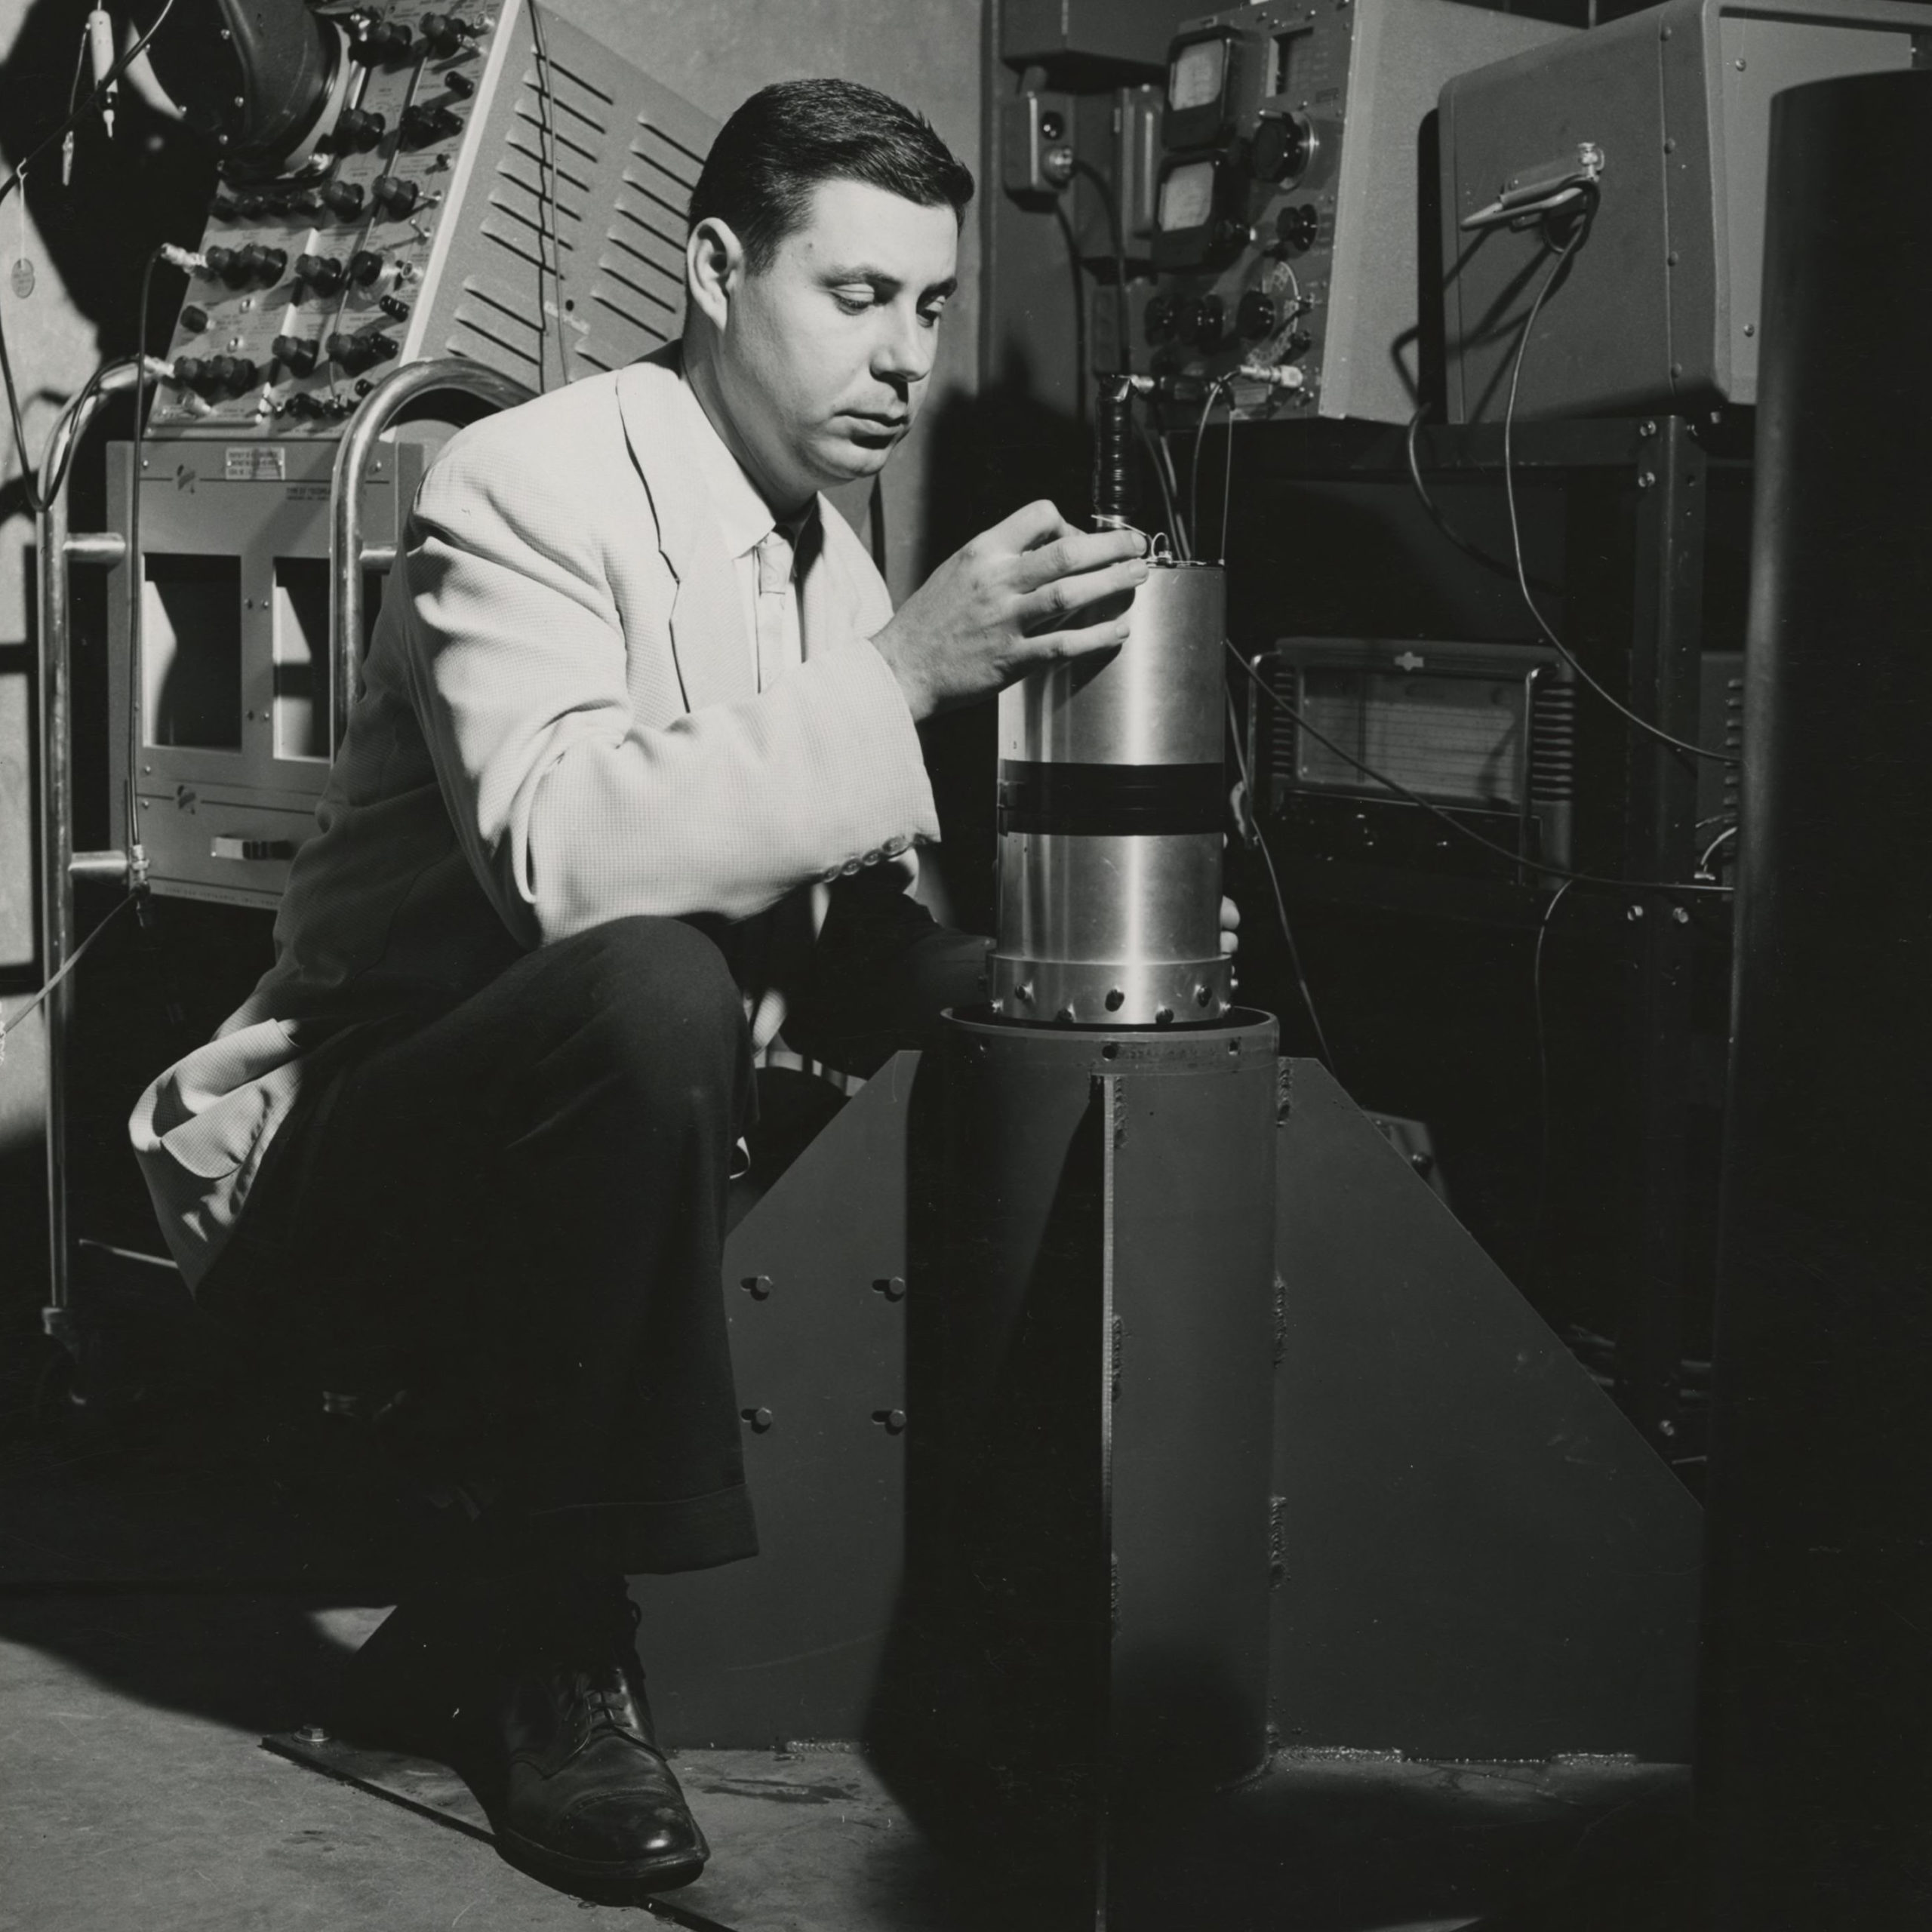 George Ludwig works on satellite equipment in a laboratory.